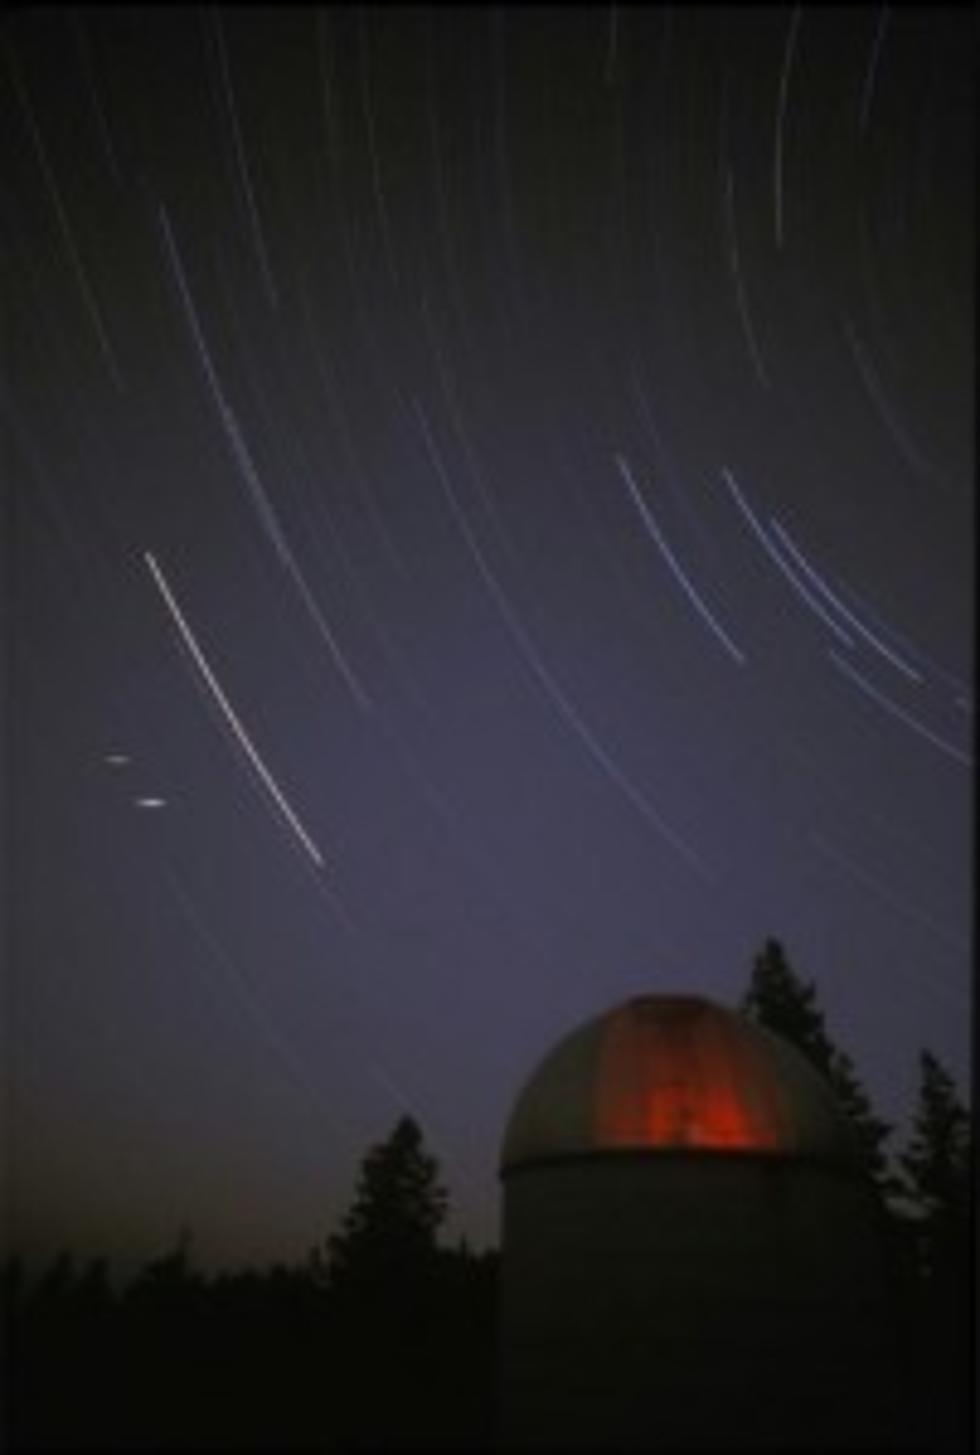 UM’s Blue Mountain Observatory Invites Public to Free Star-Gazing Events